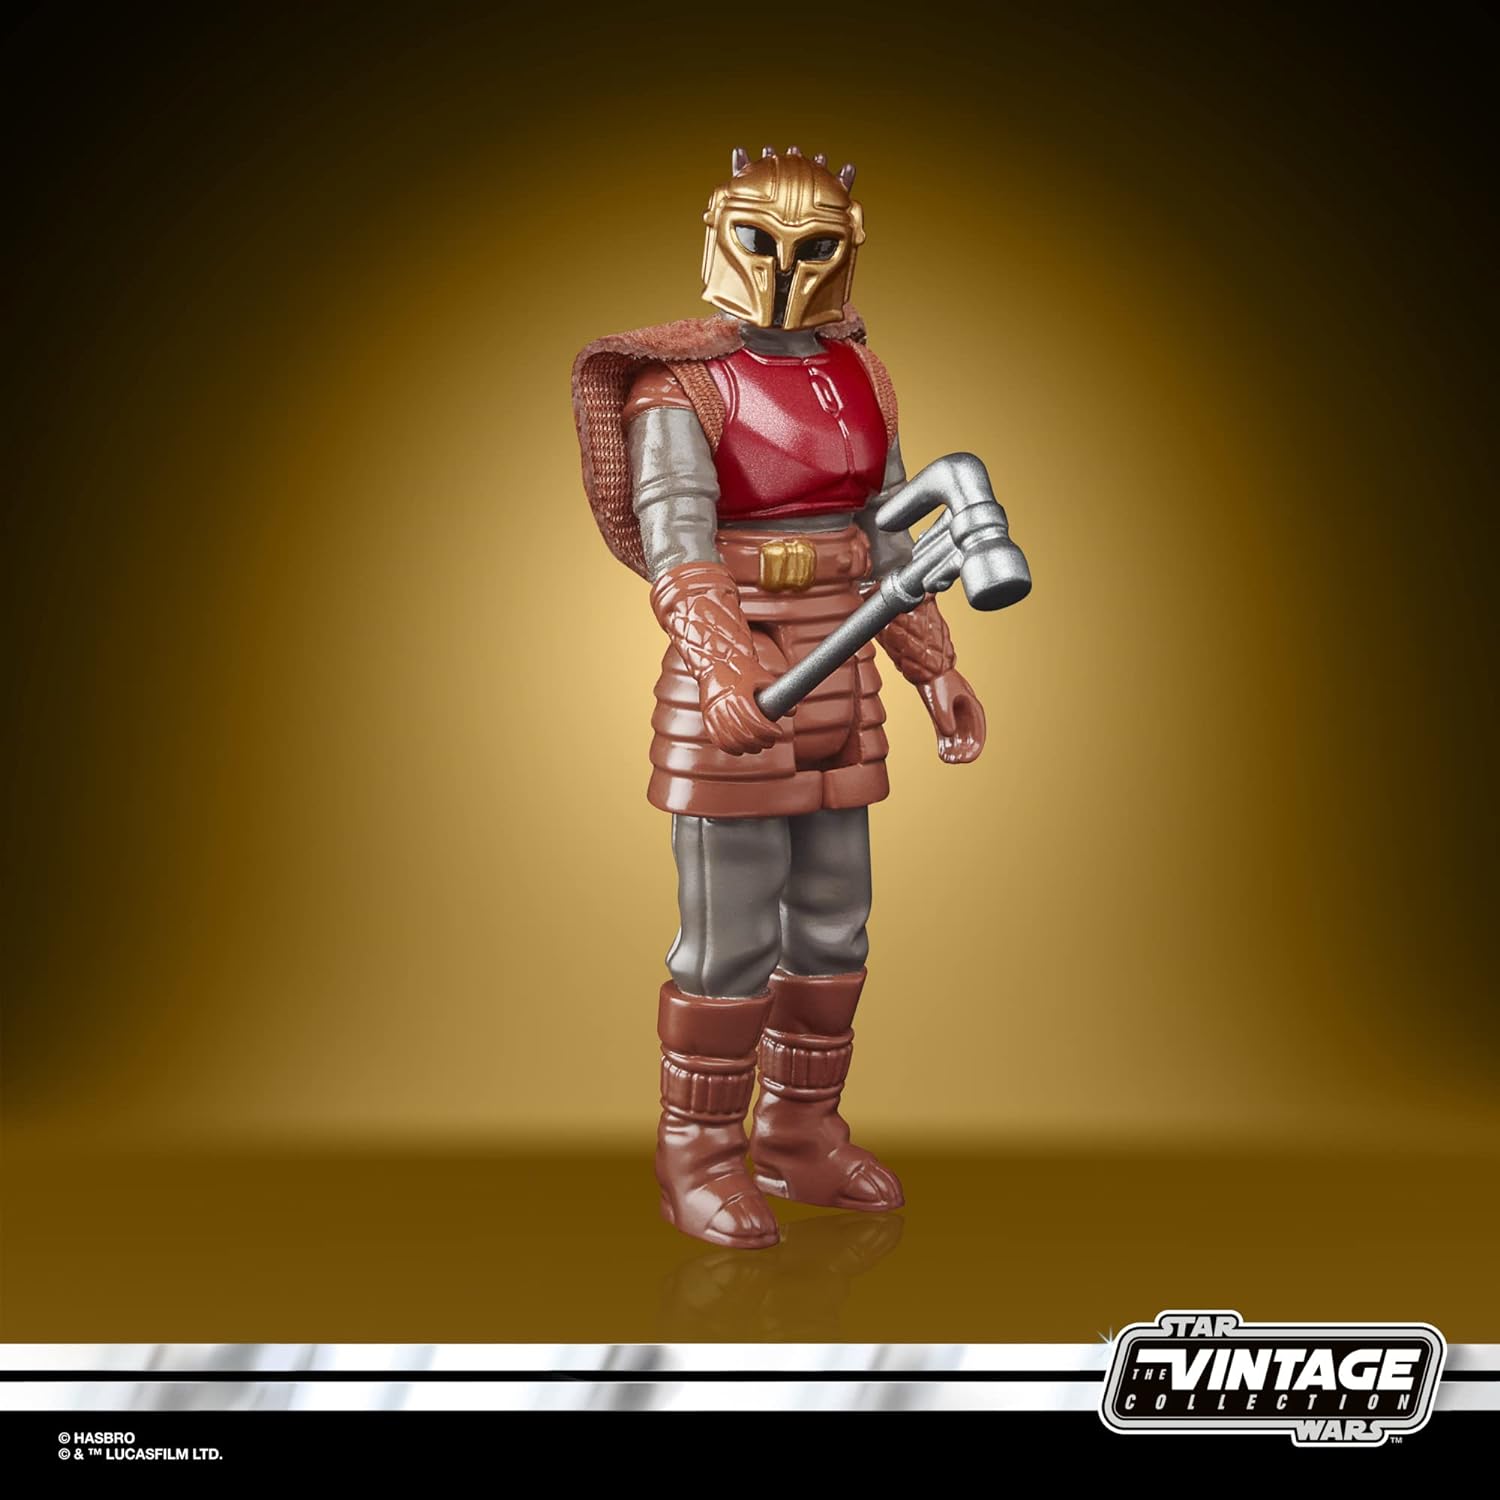 Hasbro STAR WARS Retro Collection The Armorer Toy 3.75-Inch-Scale The Mandalorian Collectible Action Figure